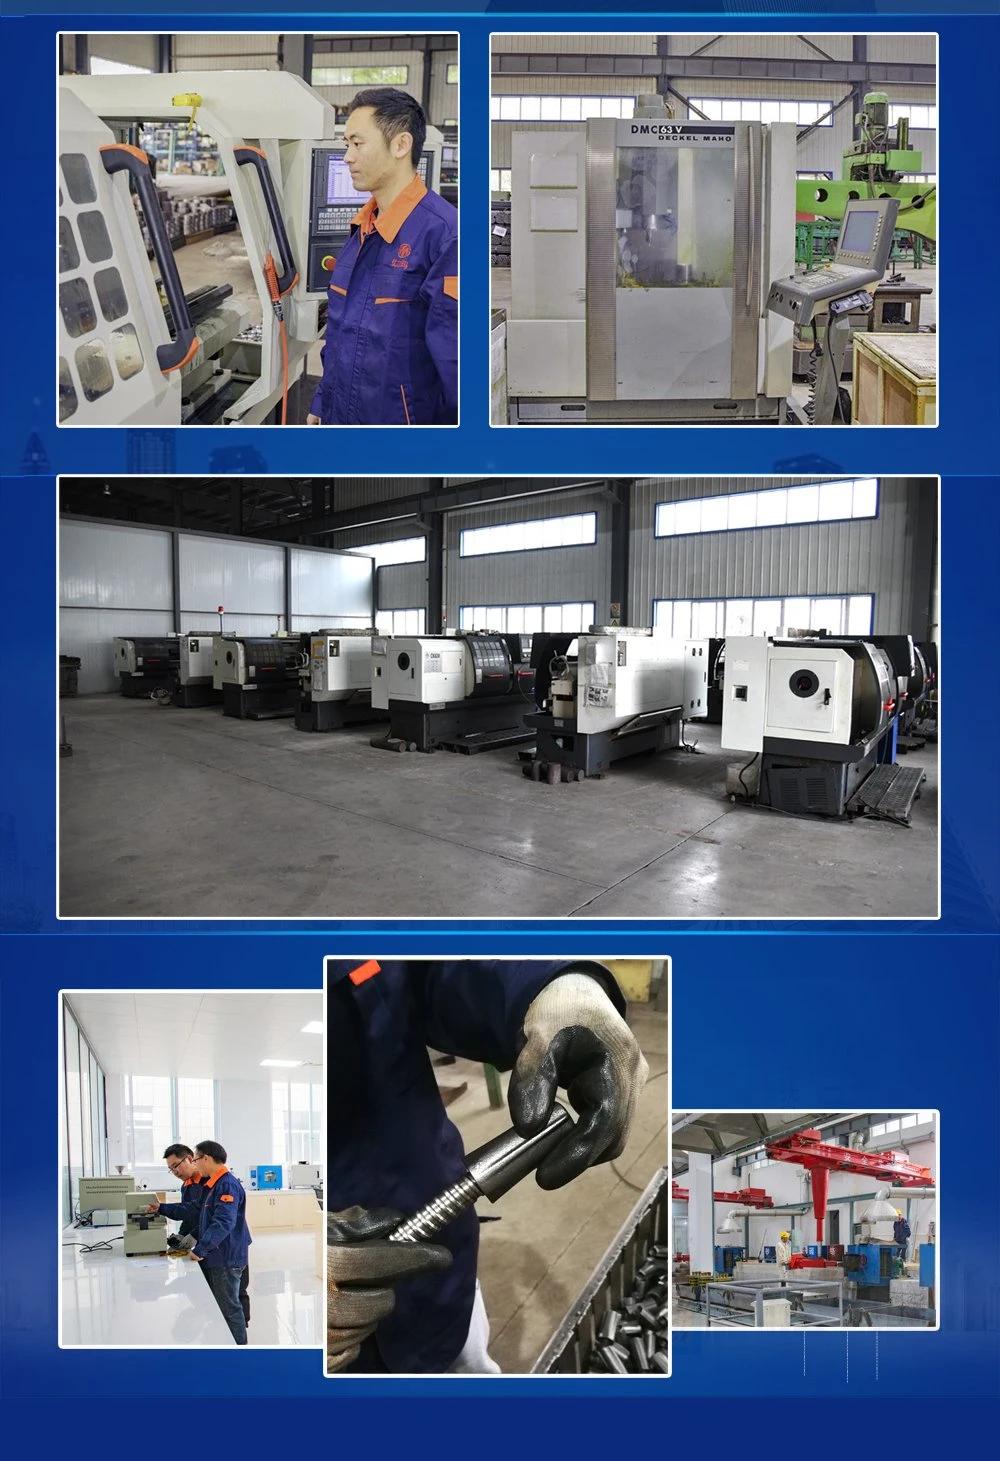 Casting,Froging,Pressing,Accessories,Component,Mating Facility,Bus,Auto Part,Nuts,Construction,Underground,Hot Galvanzied,Power Fitting,Train,Subway,Car,Nuts